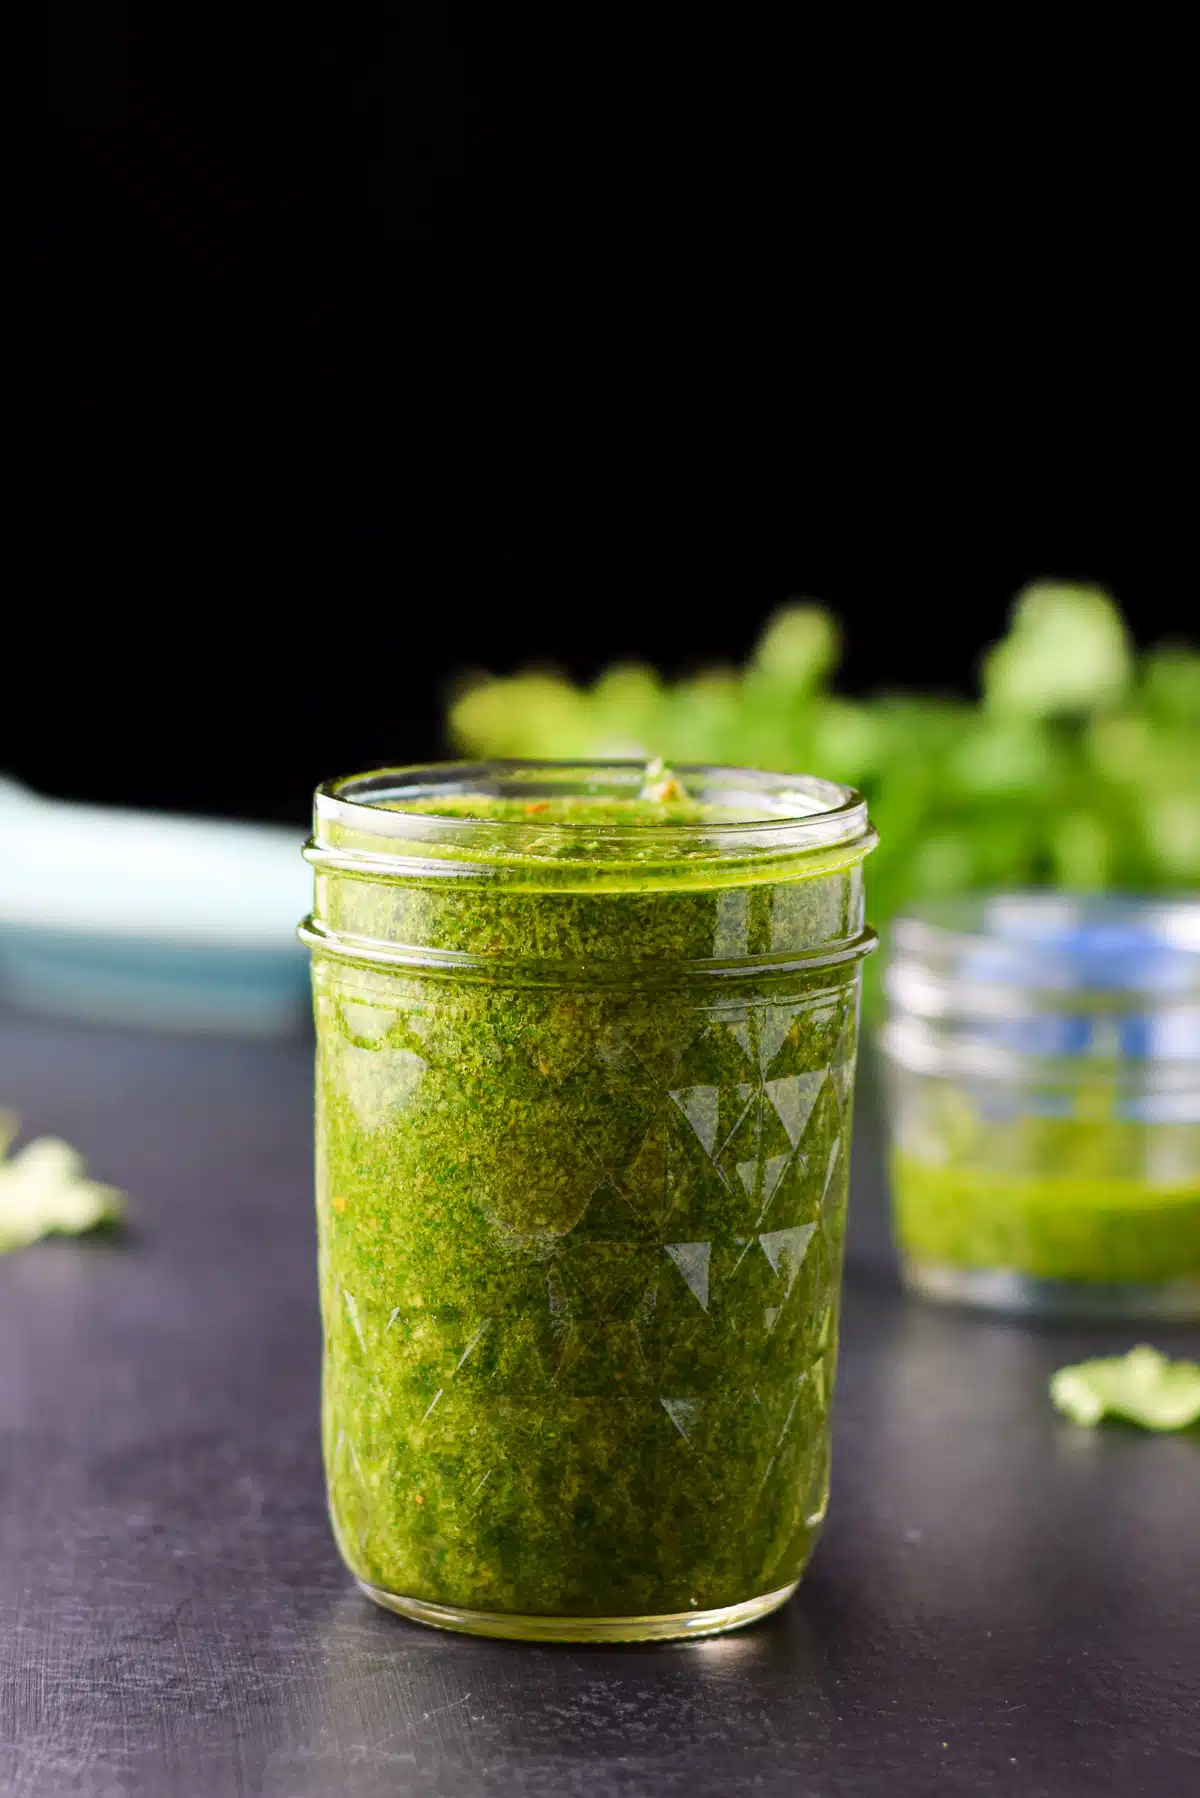 Vertical view of a all jar full of a green sauce with parsley leaves in the background